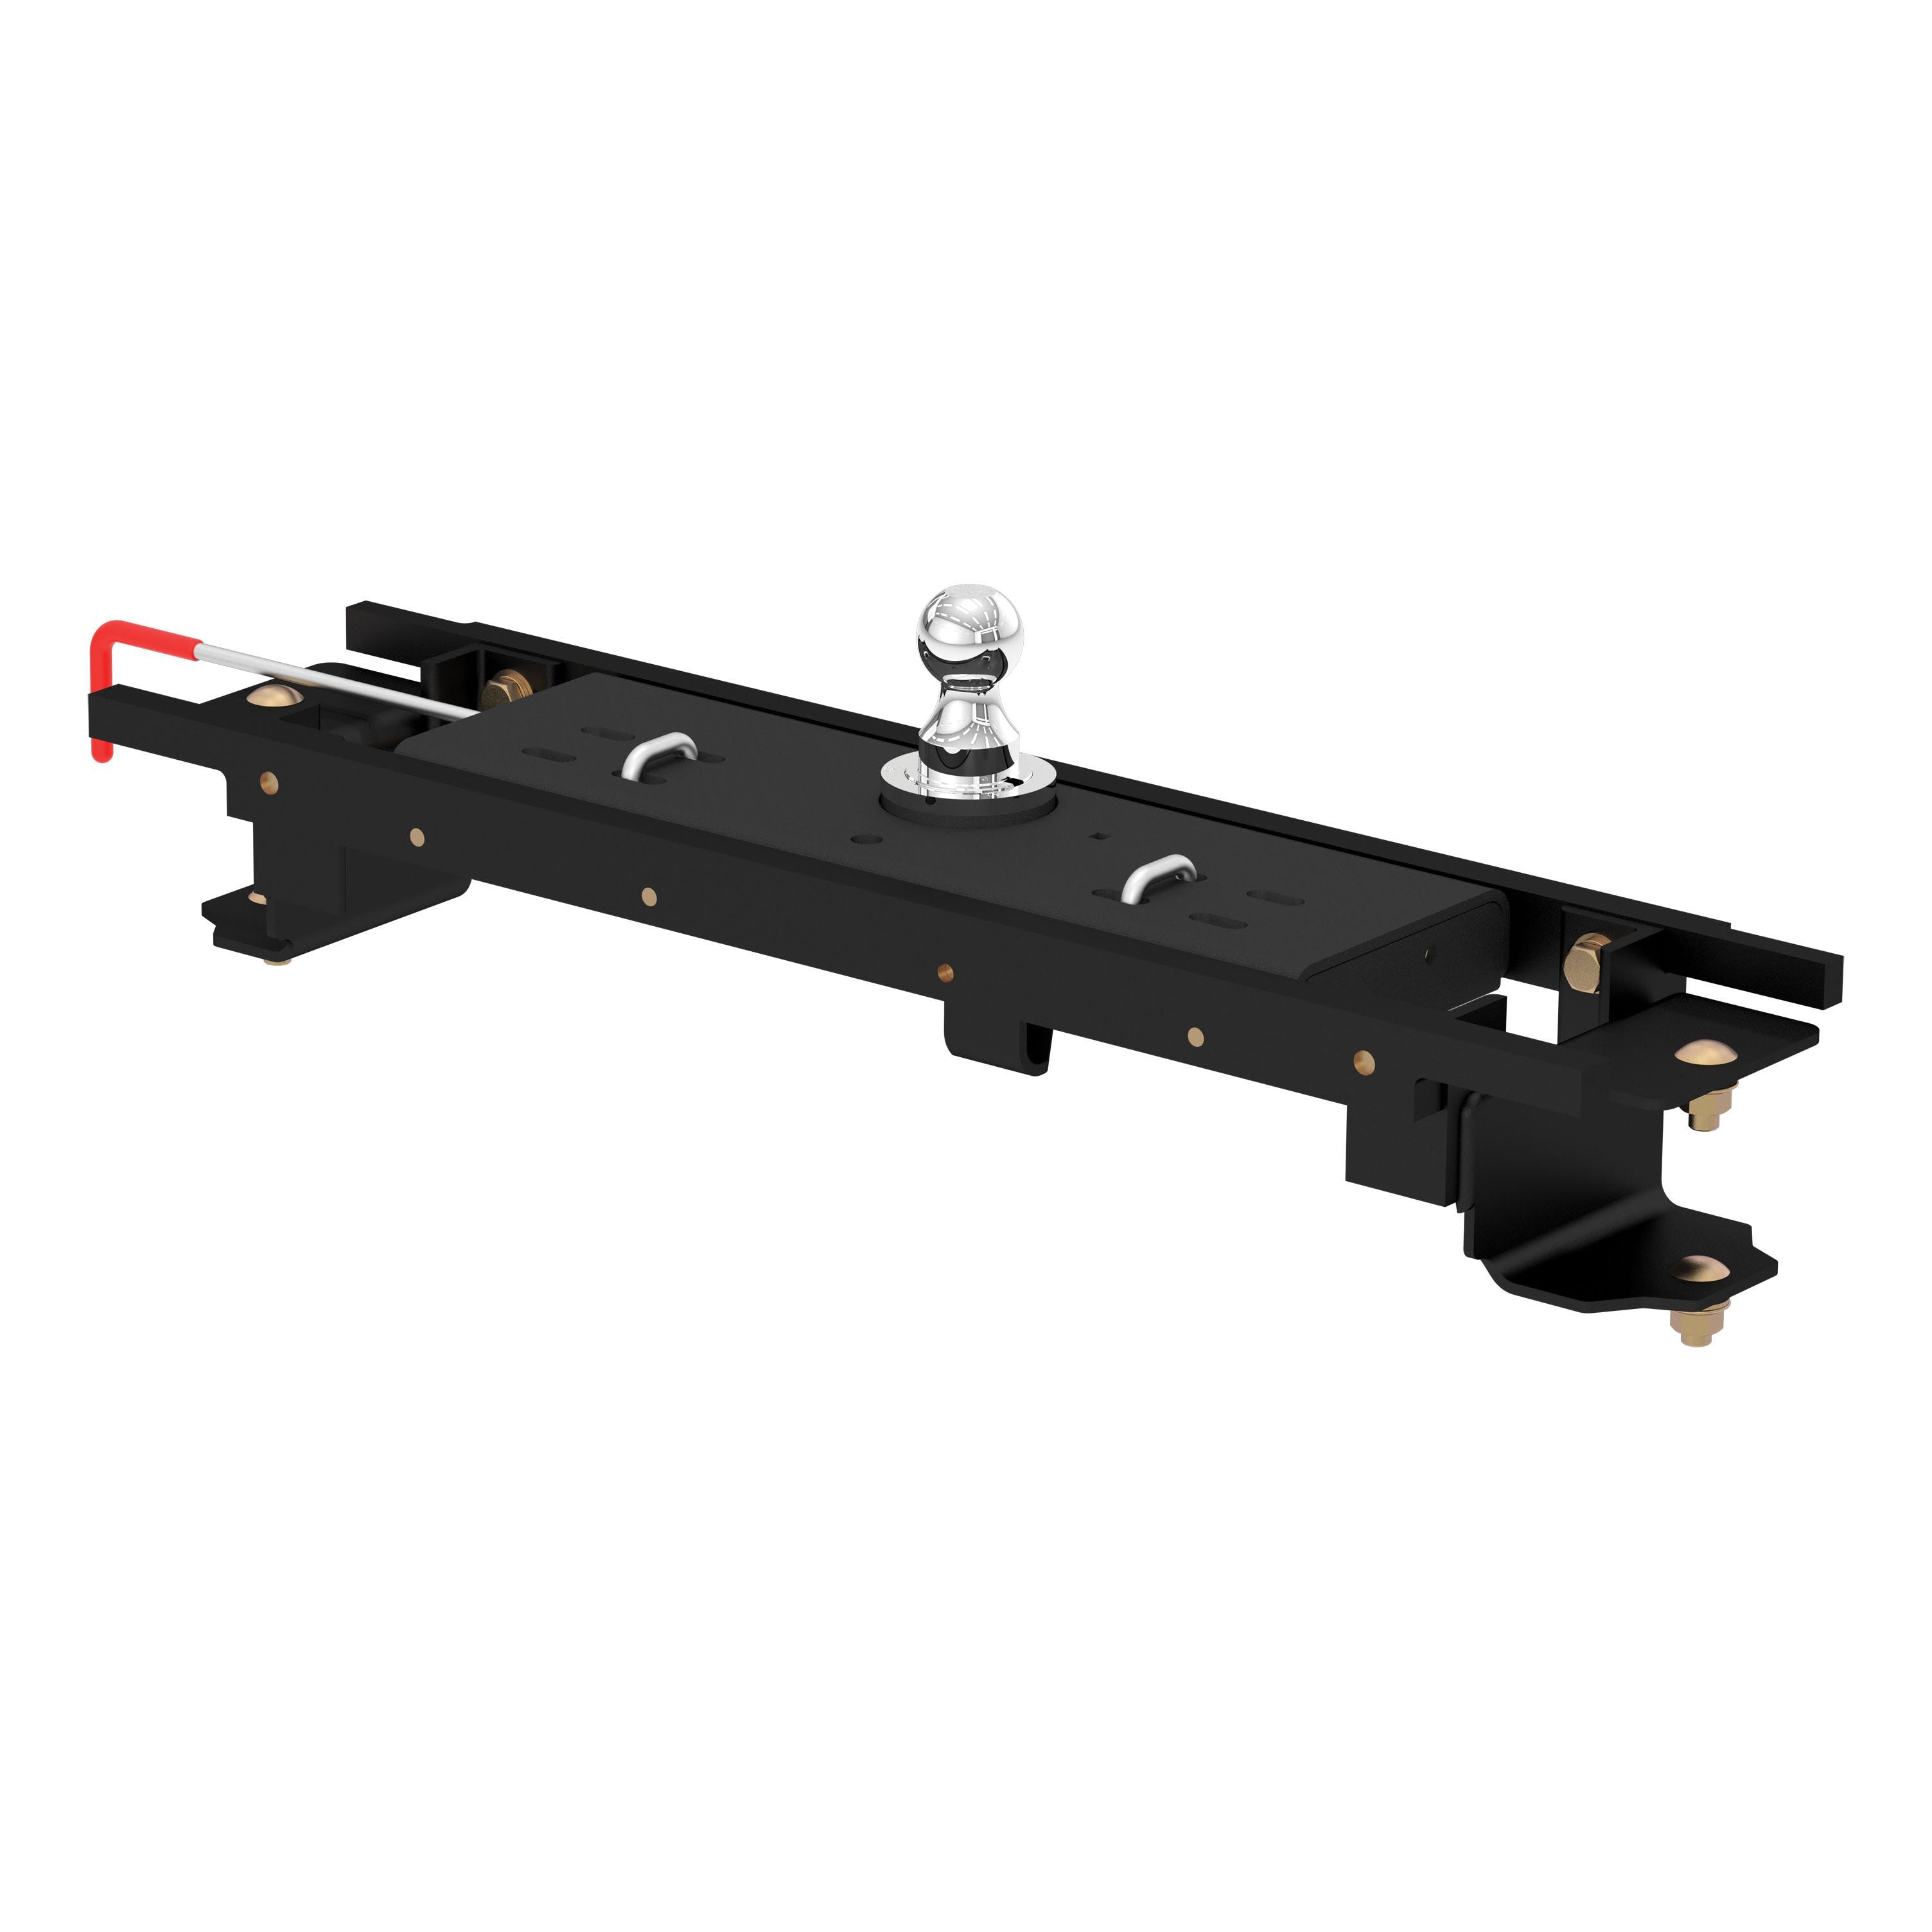 CURT 60751 Double Lock Gooseneck Hitch Kit with Brackets, Select Toyota Tundra, 6.5' Bed